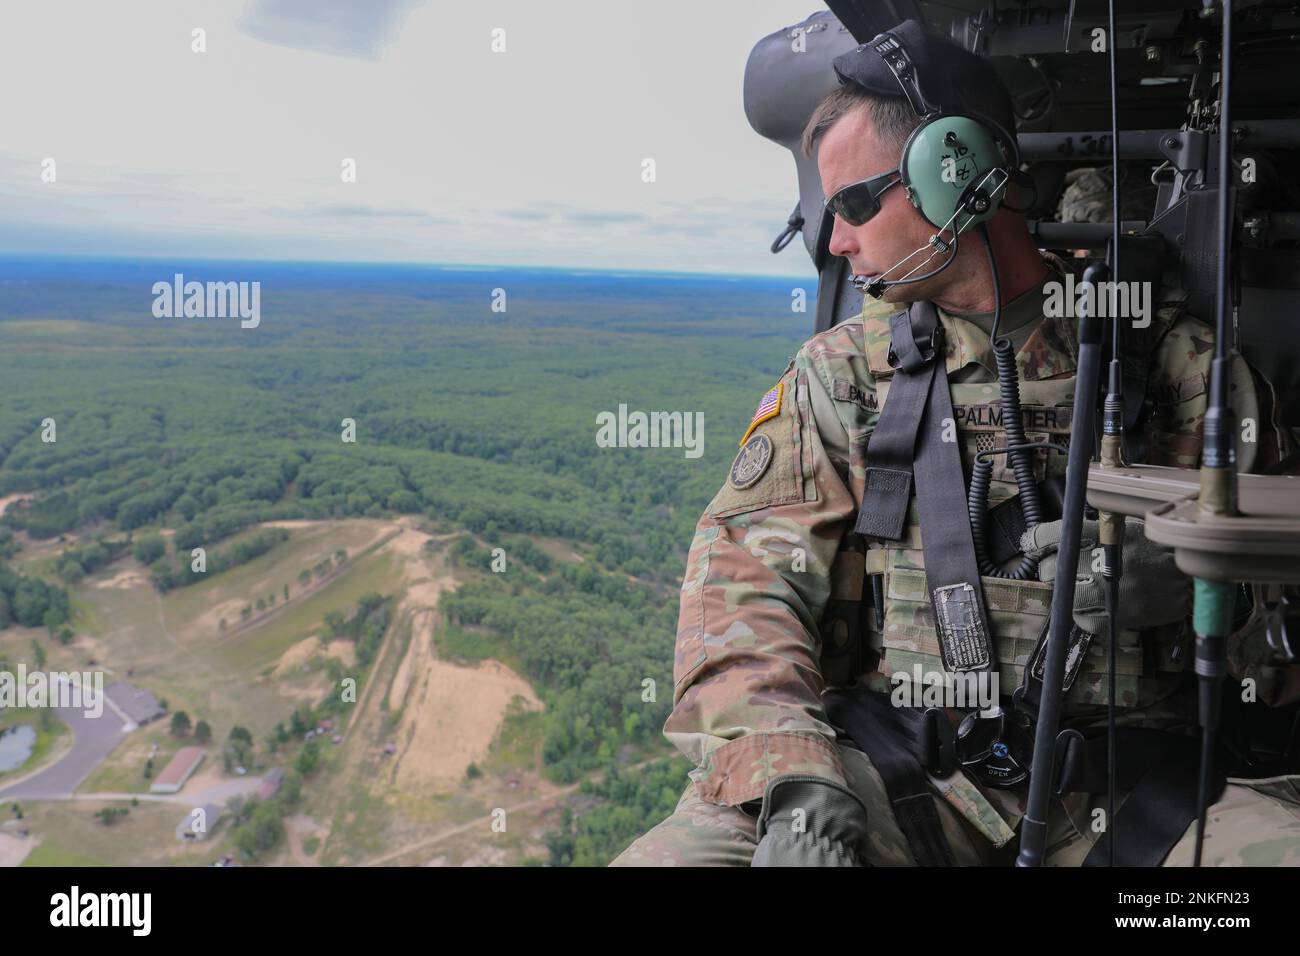 U.S. Army Cpt. Tucker Palmatier, a Cyber Electronic Warfare Officer assigned to the 37th Infantry Brigade Combat Team, monitors Versatile Radio Observation and Direction (VROD) equipment during a training mission, August 14, 2022, at Camp Grayling, Michigan. The exercise, which was in partnership with the National Guard Bureau, allowed Palmatier to test the equipment in a variety of environments, increasing the warfighting capabilities and readiness of the 37th IBCT. Stock Photo